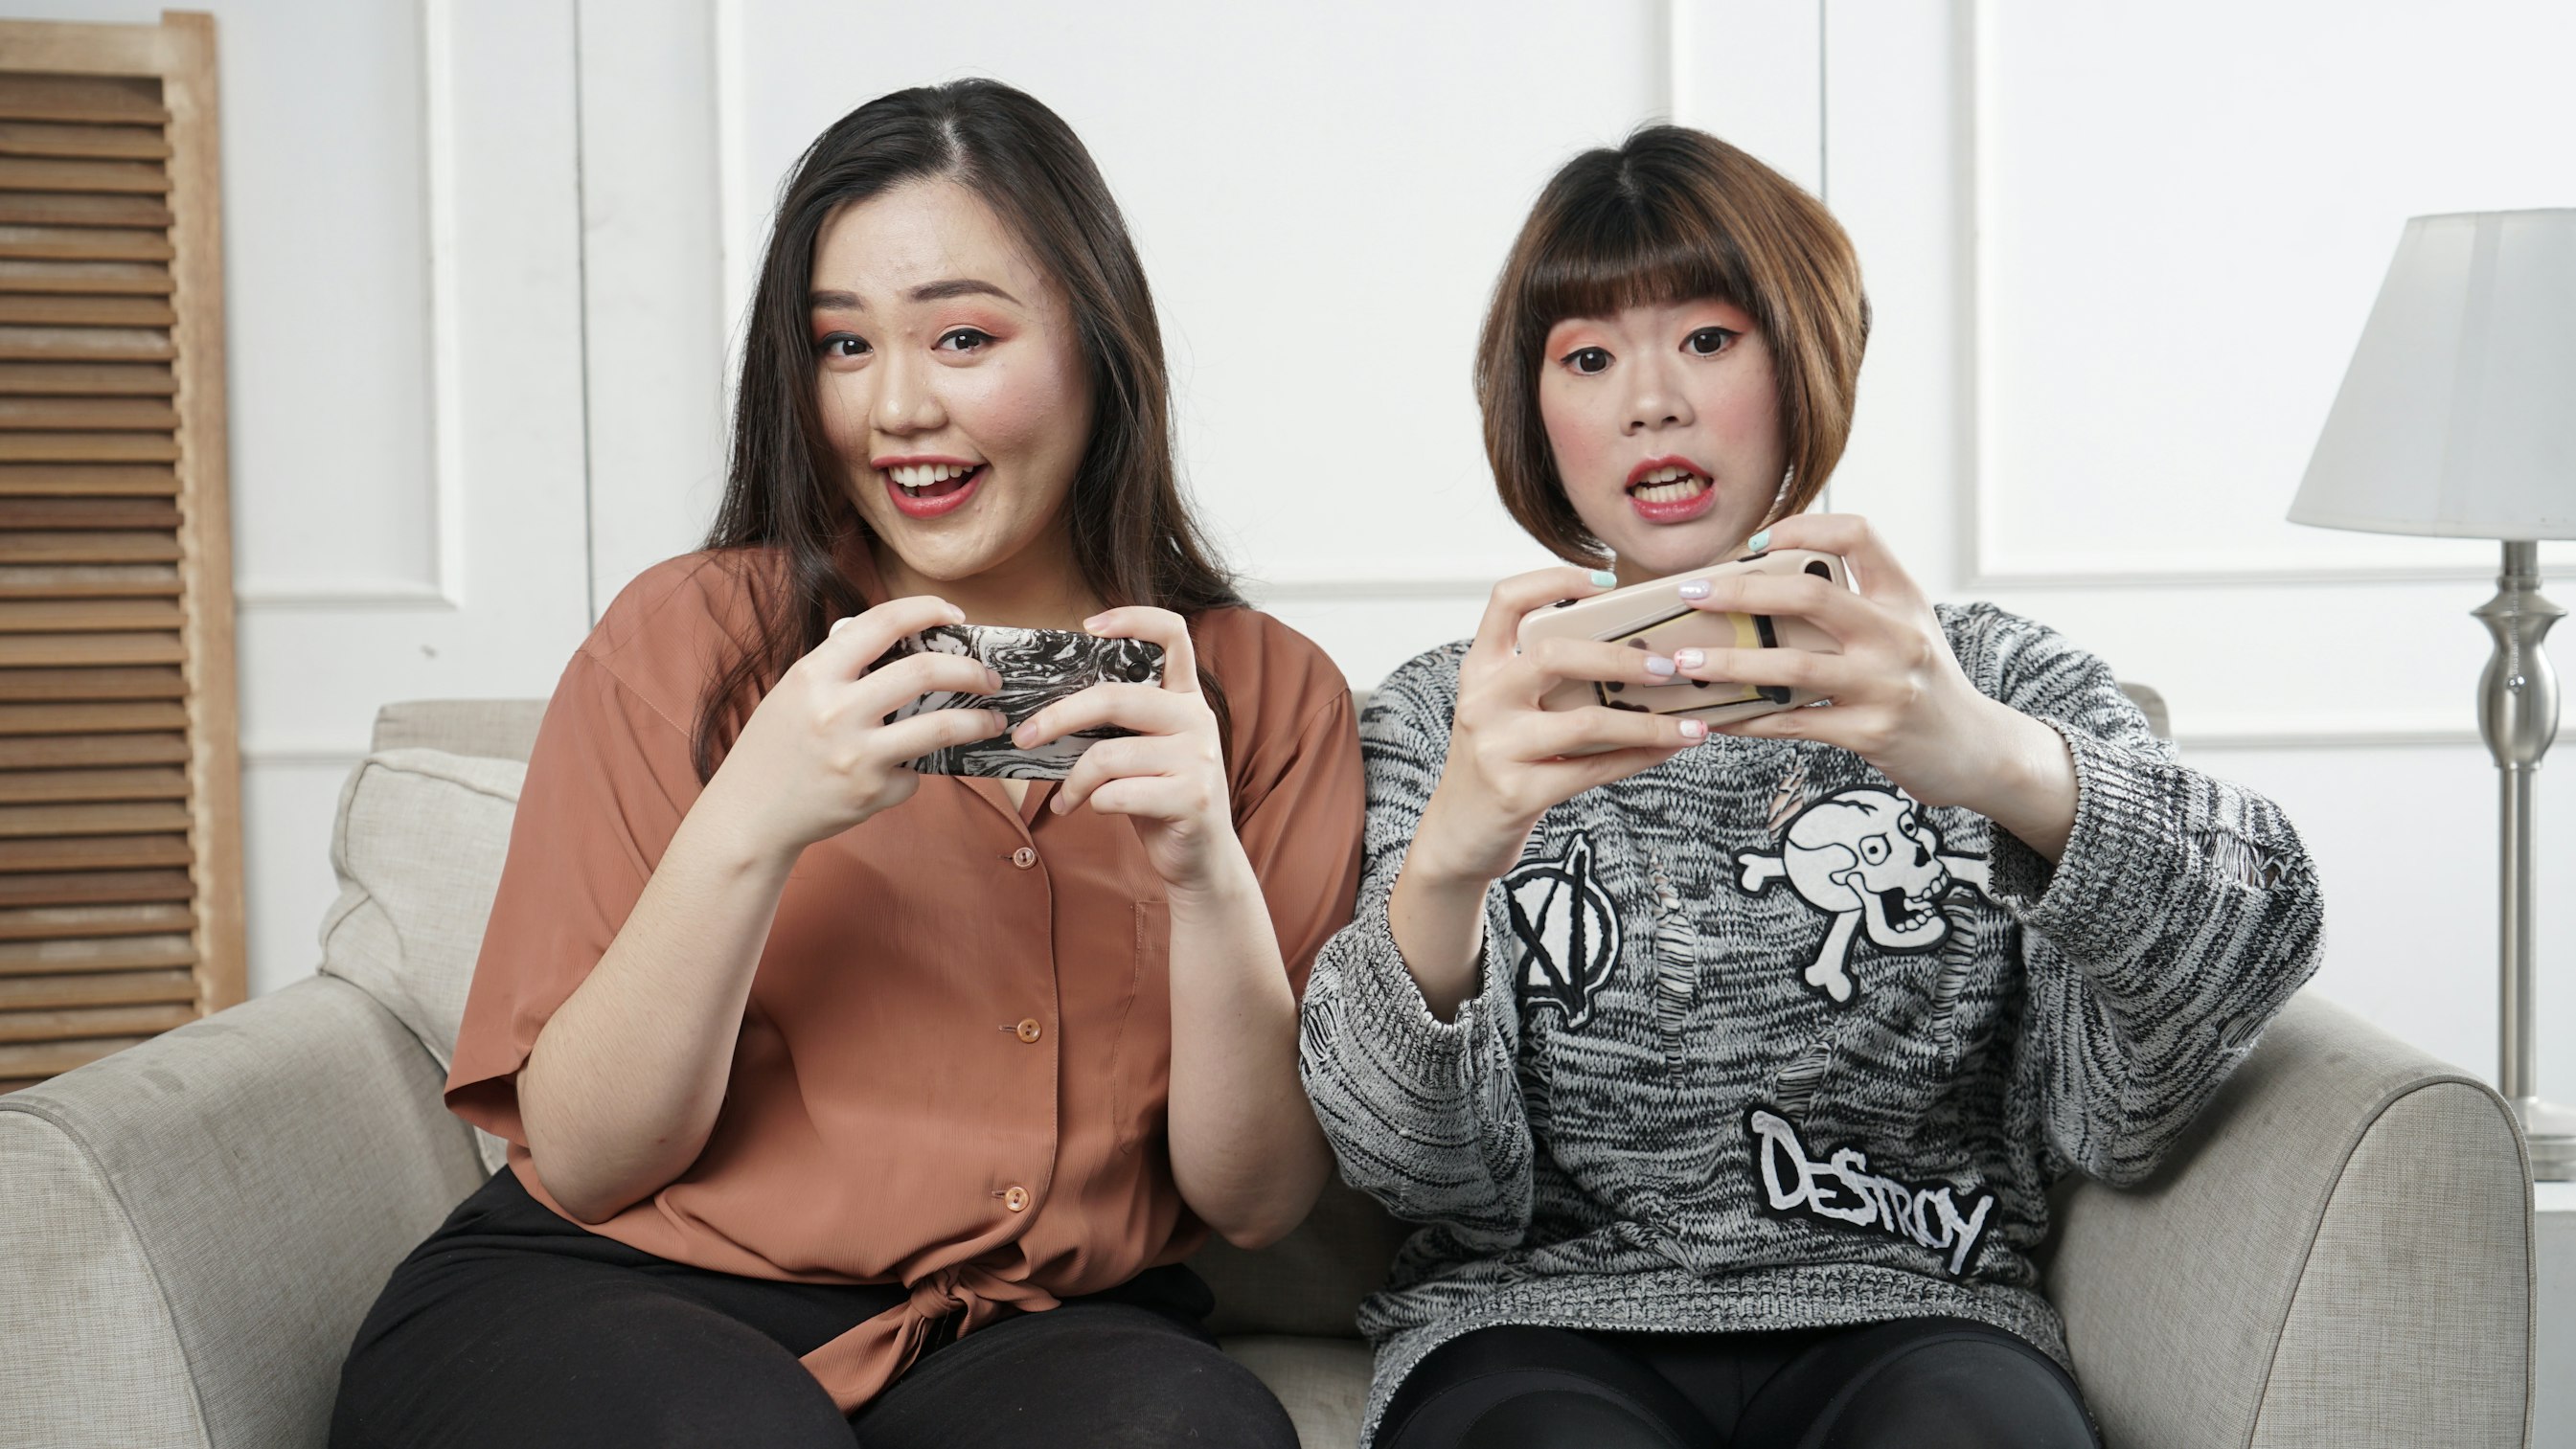 Two girls playing - play games online with friends